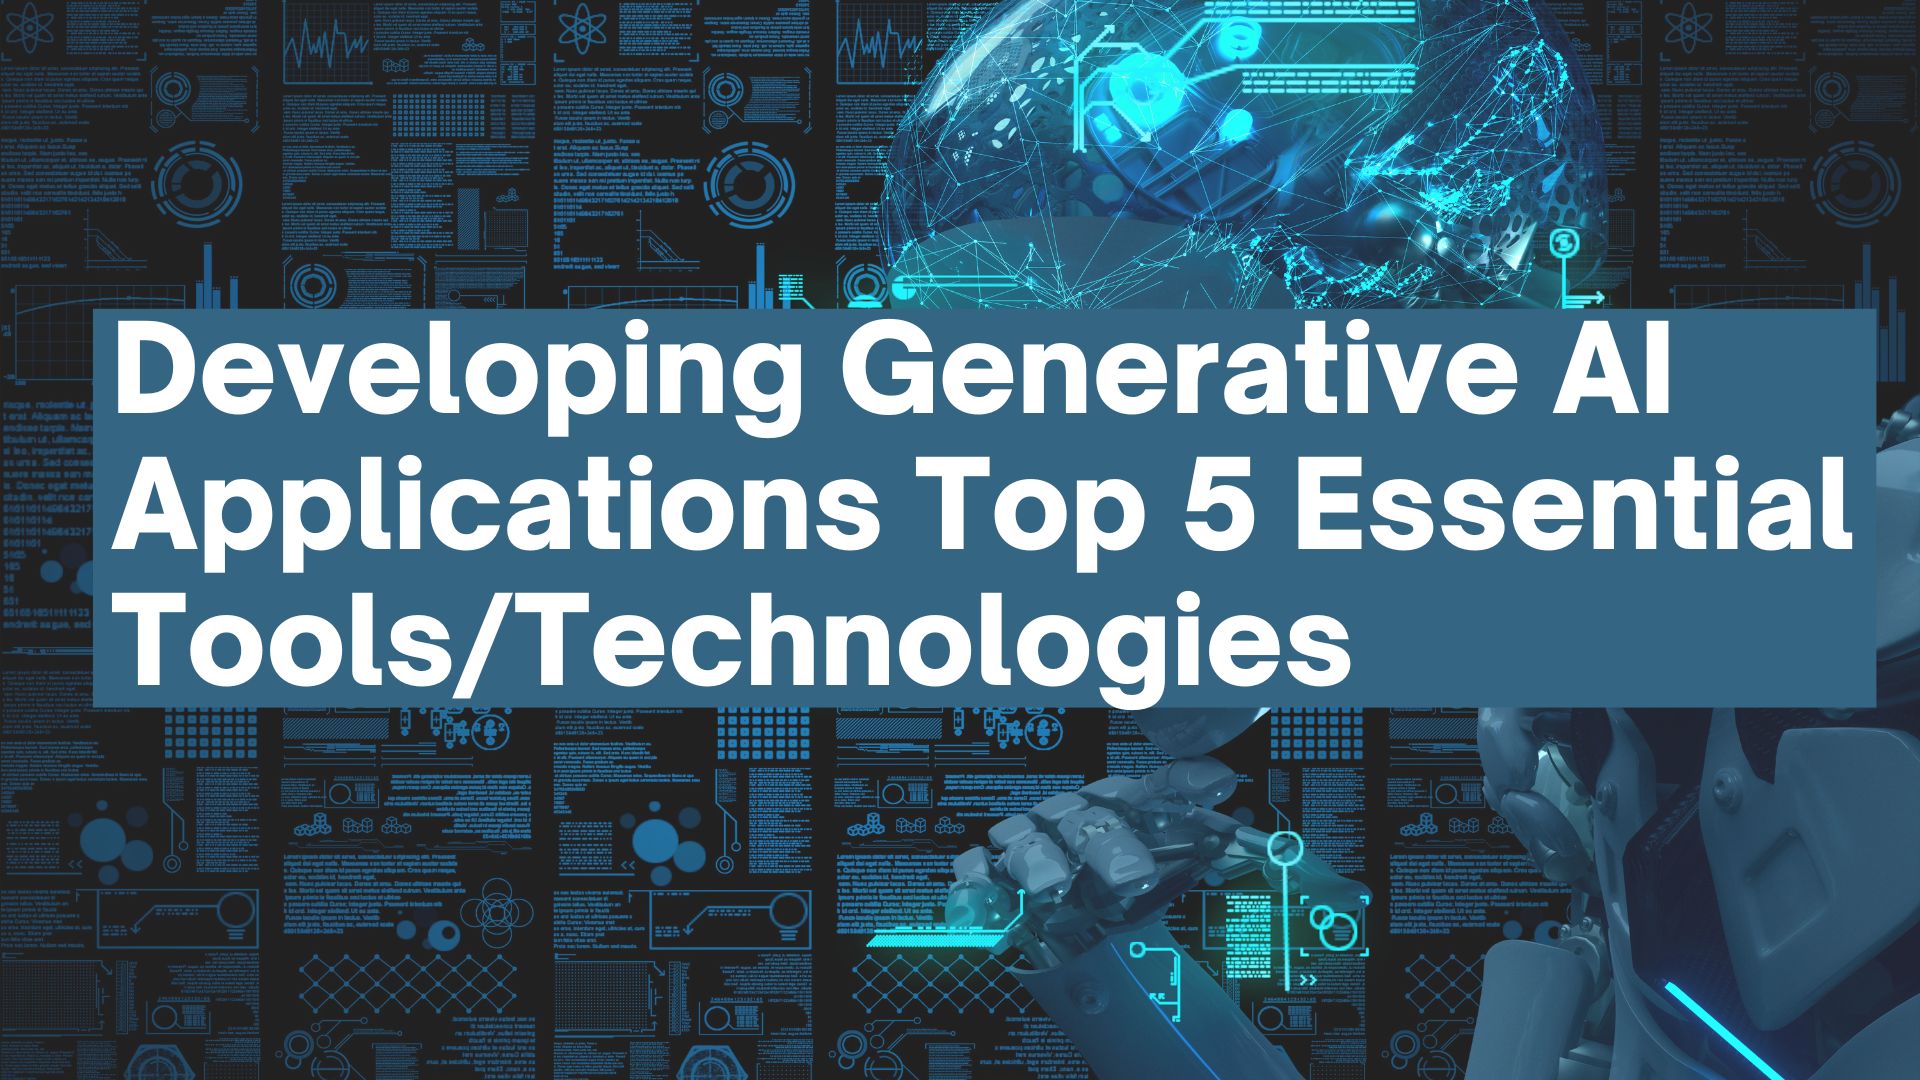 Developing Generative AI Applications: Top 5 Essential Tools/Technologies